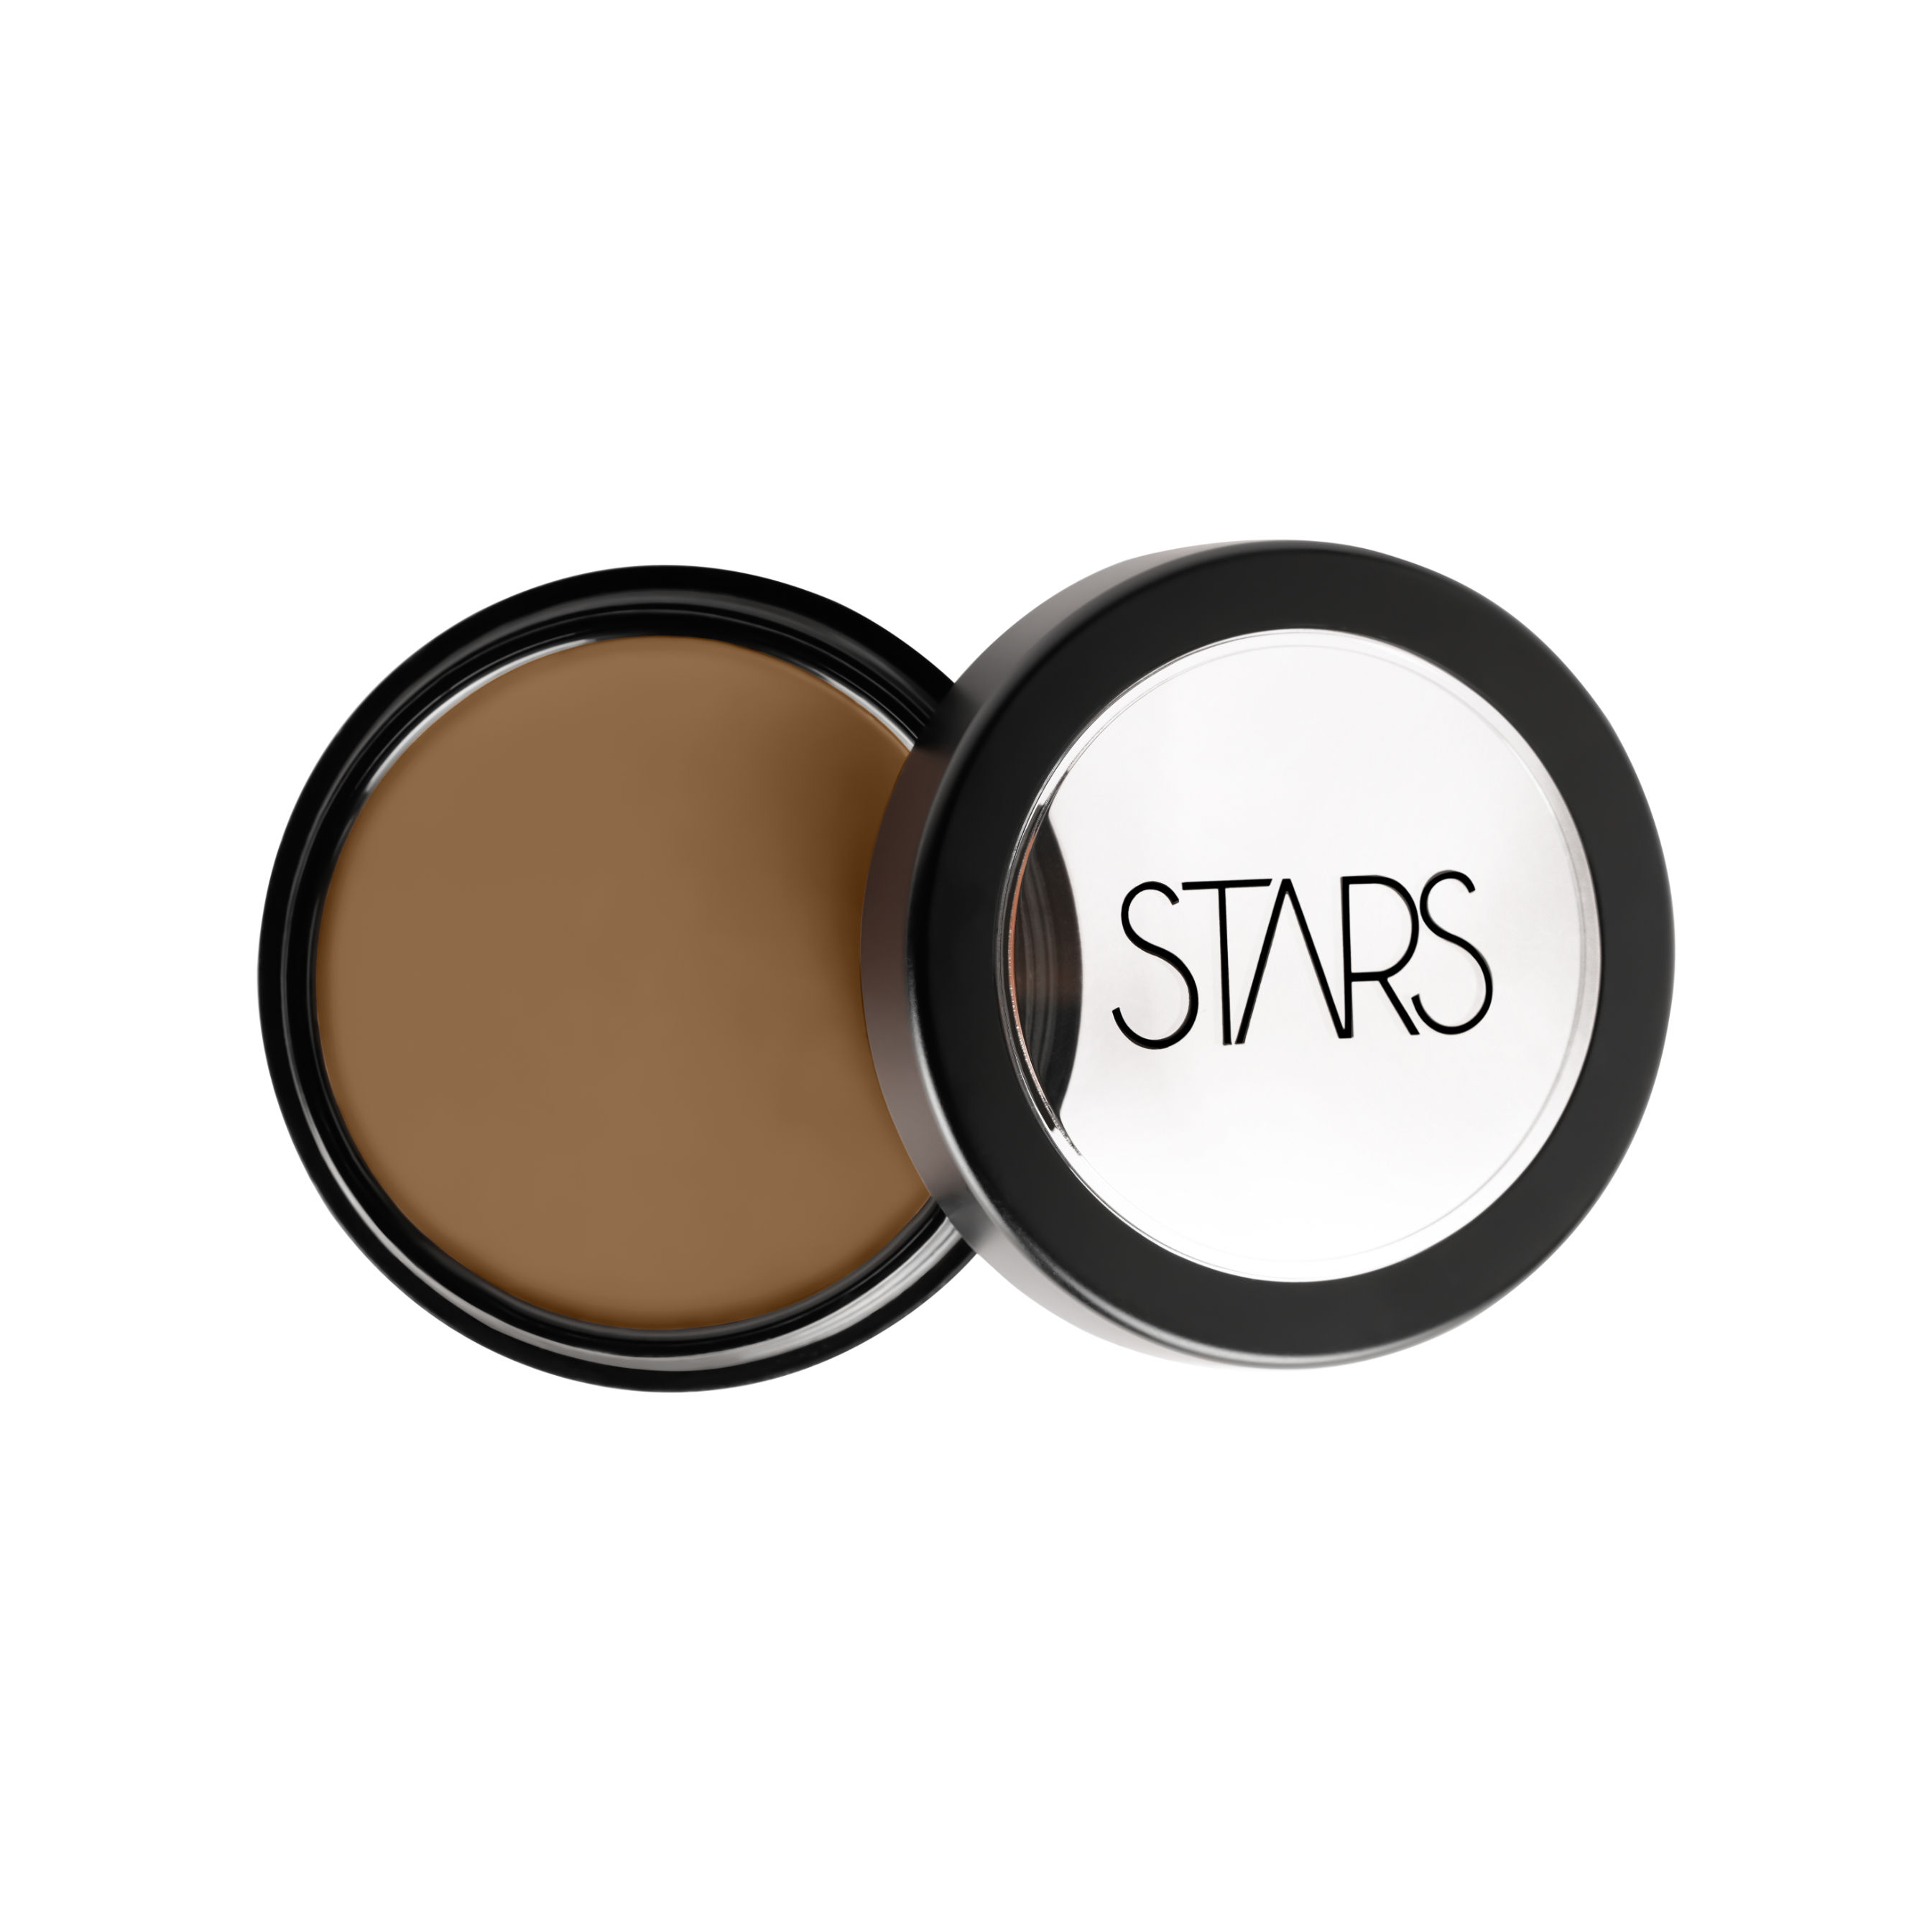 Stars Cosmetics Derma Series Foundation For Face Makeup Creamy Matte Finish Dj4 Brown 8gm At Nykaa Best Beauty Products Online